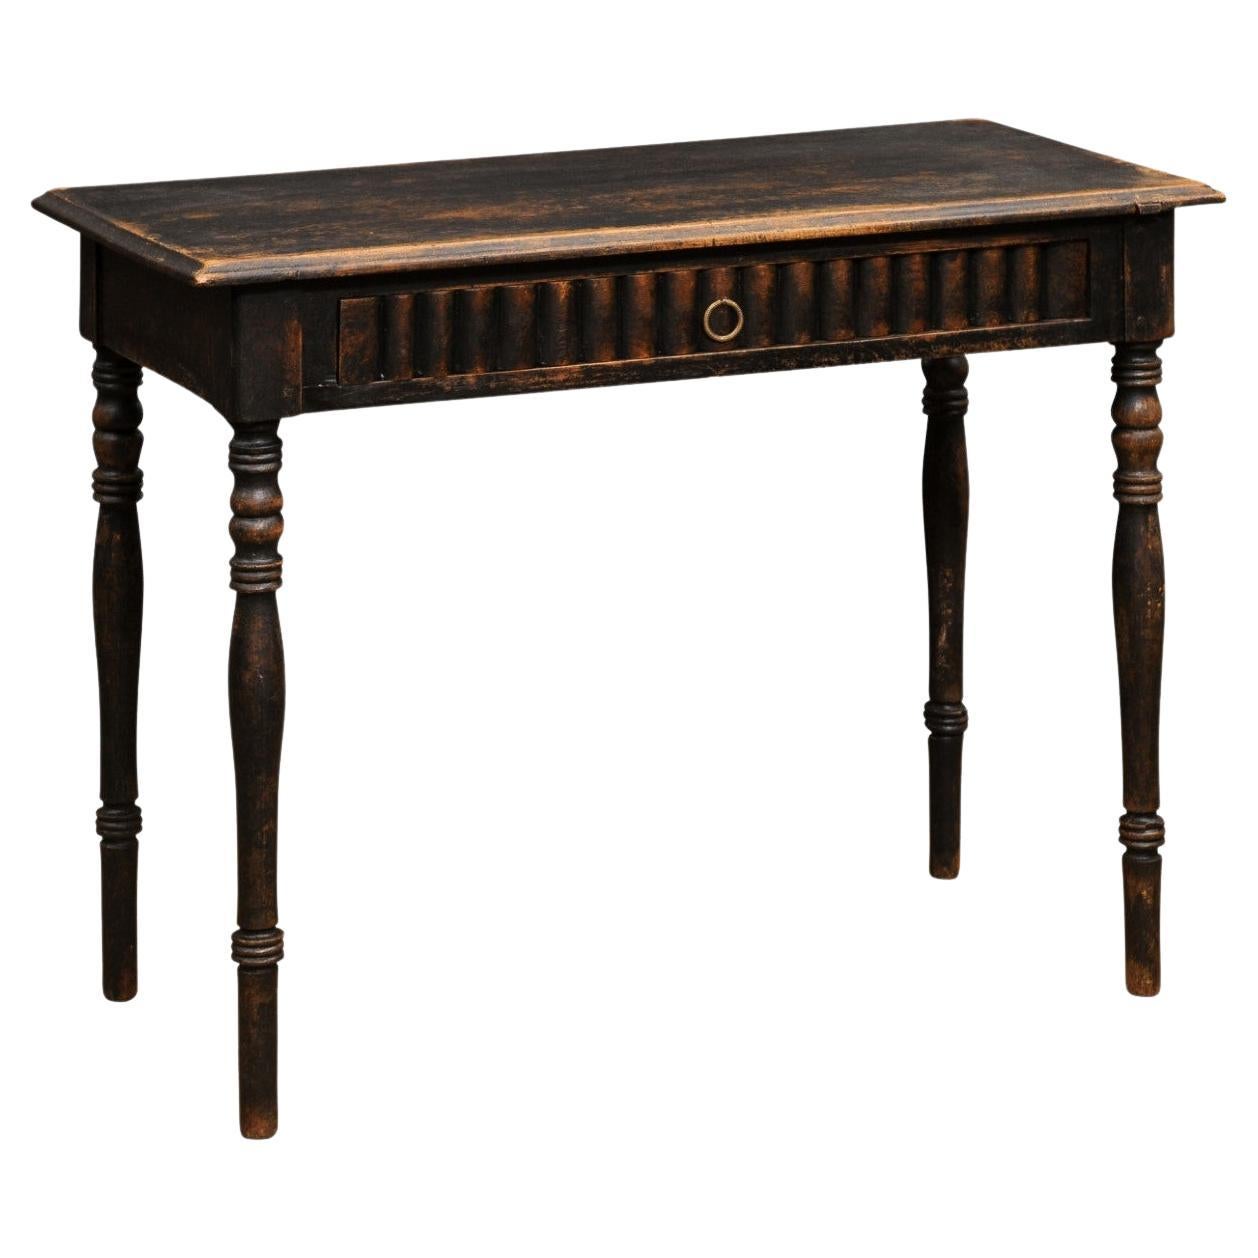 Swedish 1860s Painted Wood Desk with Dark Patina and Reeded Drawer